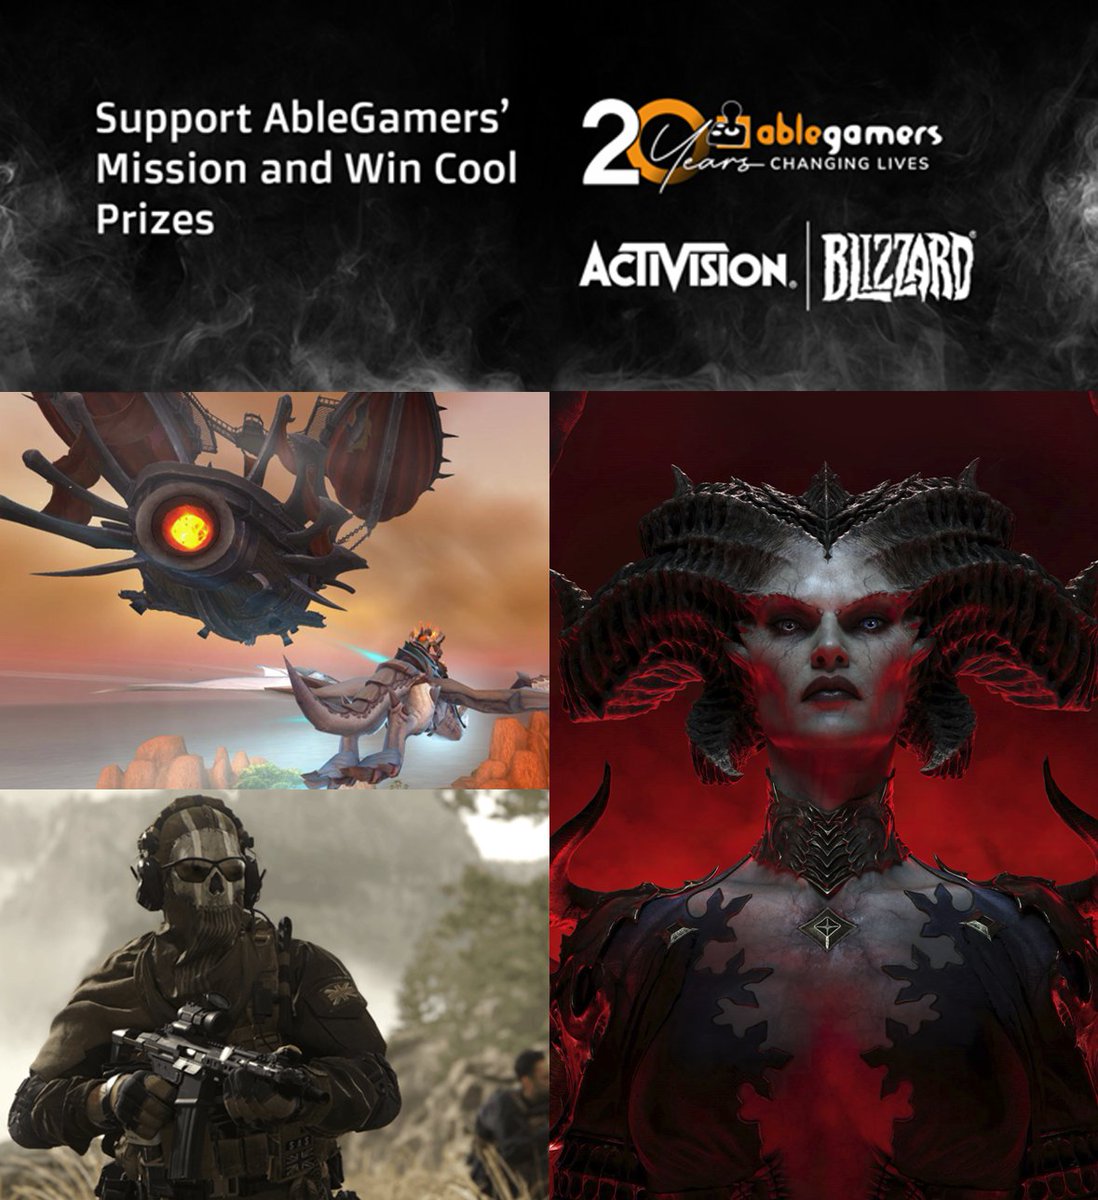 Our team at @ATVI_AB has donated some amazing prizes for @AbleGamers fundraiser. Join with us to support making gaming more accessible by donating for a chance to win epic prizes like a tour of Treyarch or Blizzard. All proceeds support AbleGamers 💚 #gamingforeveryone Details…